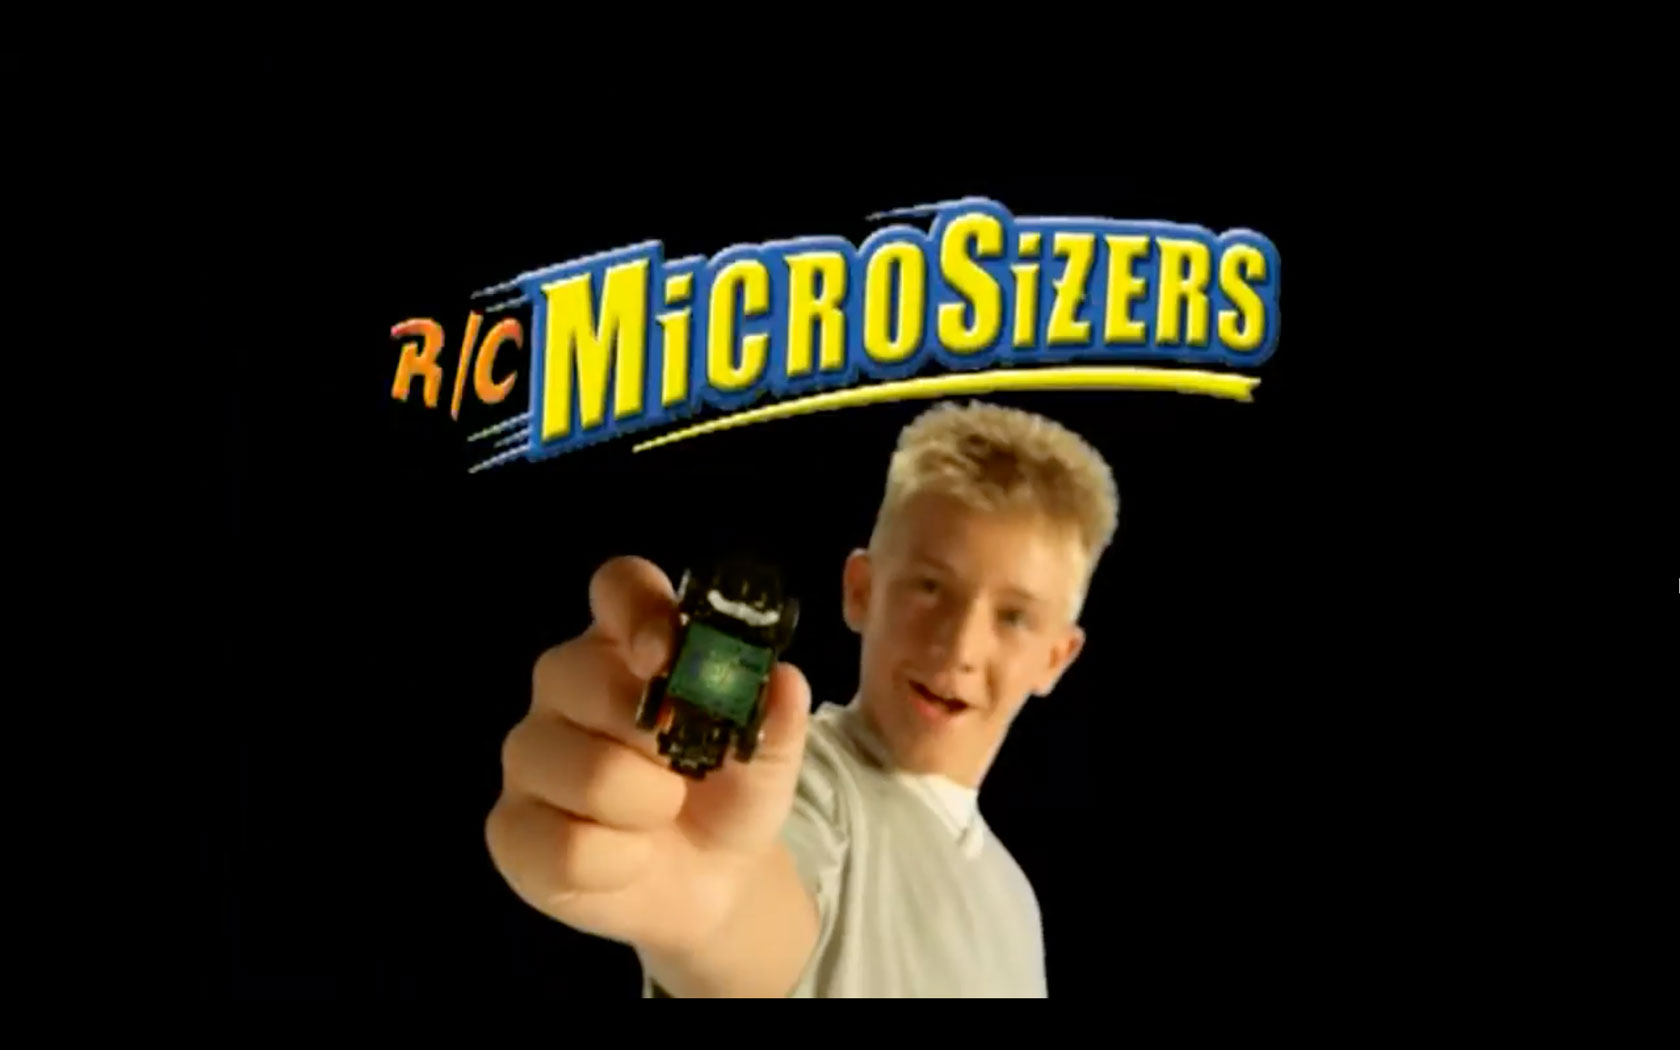 Featured image for “R/C Microsizers”